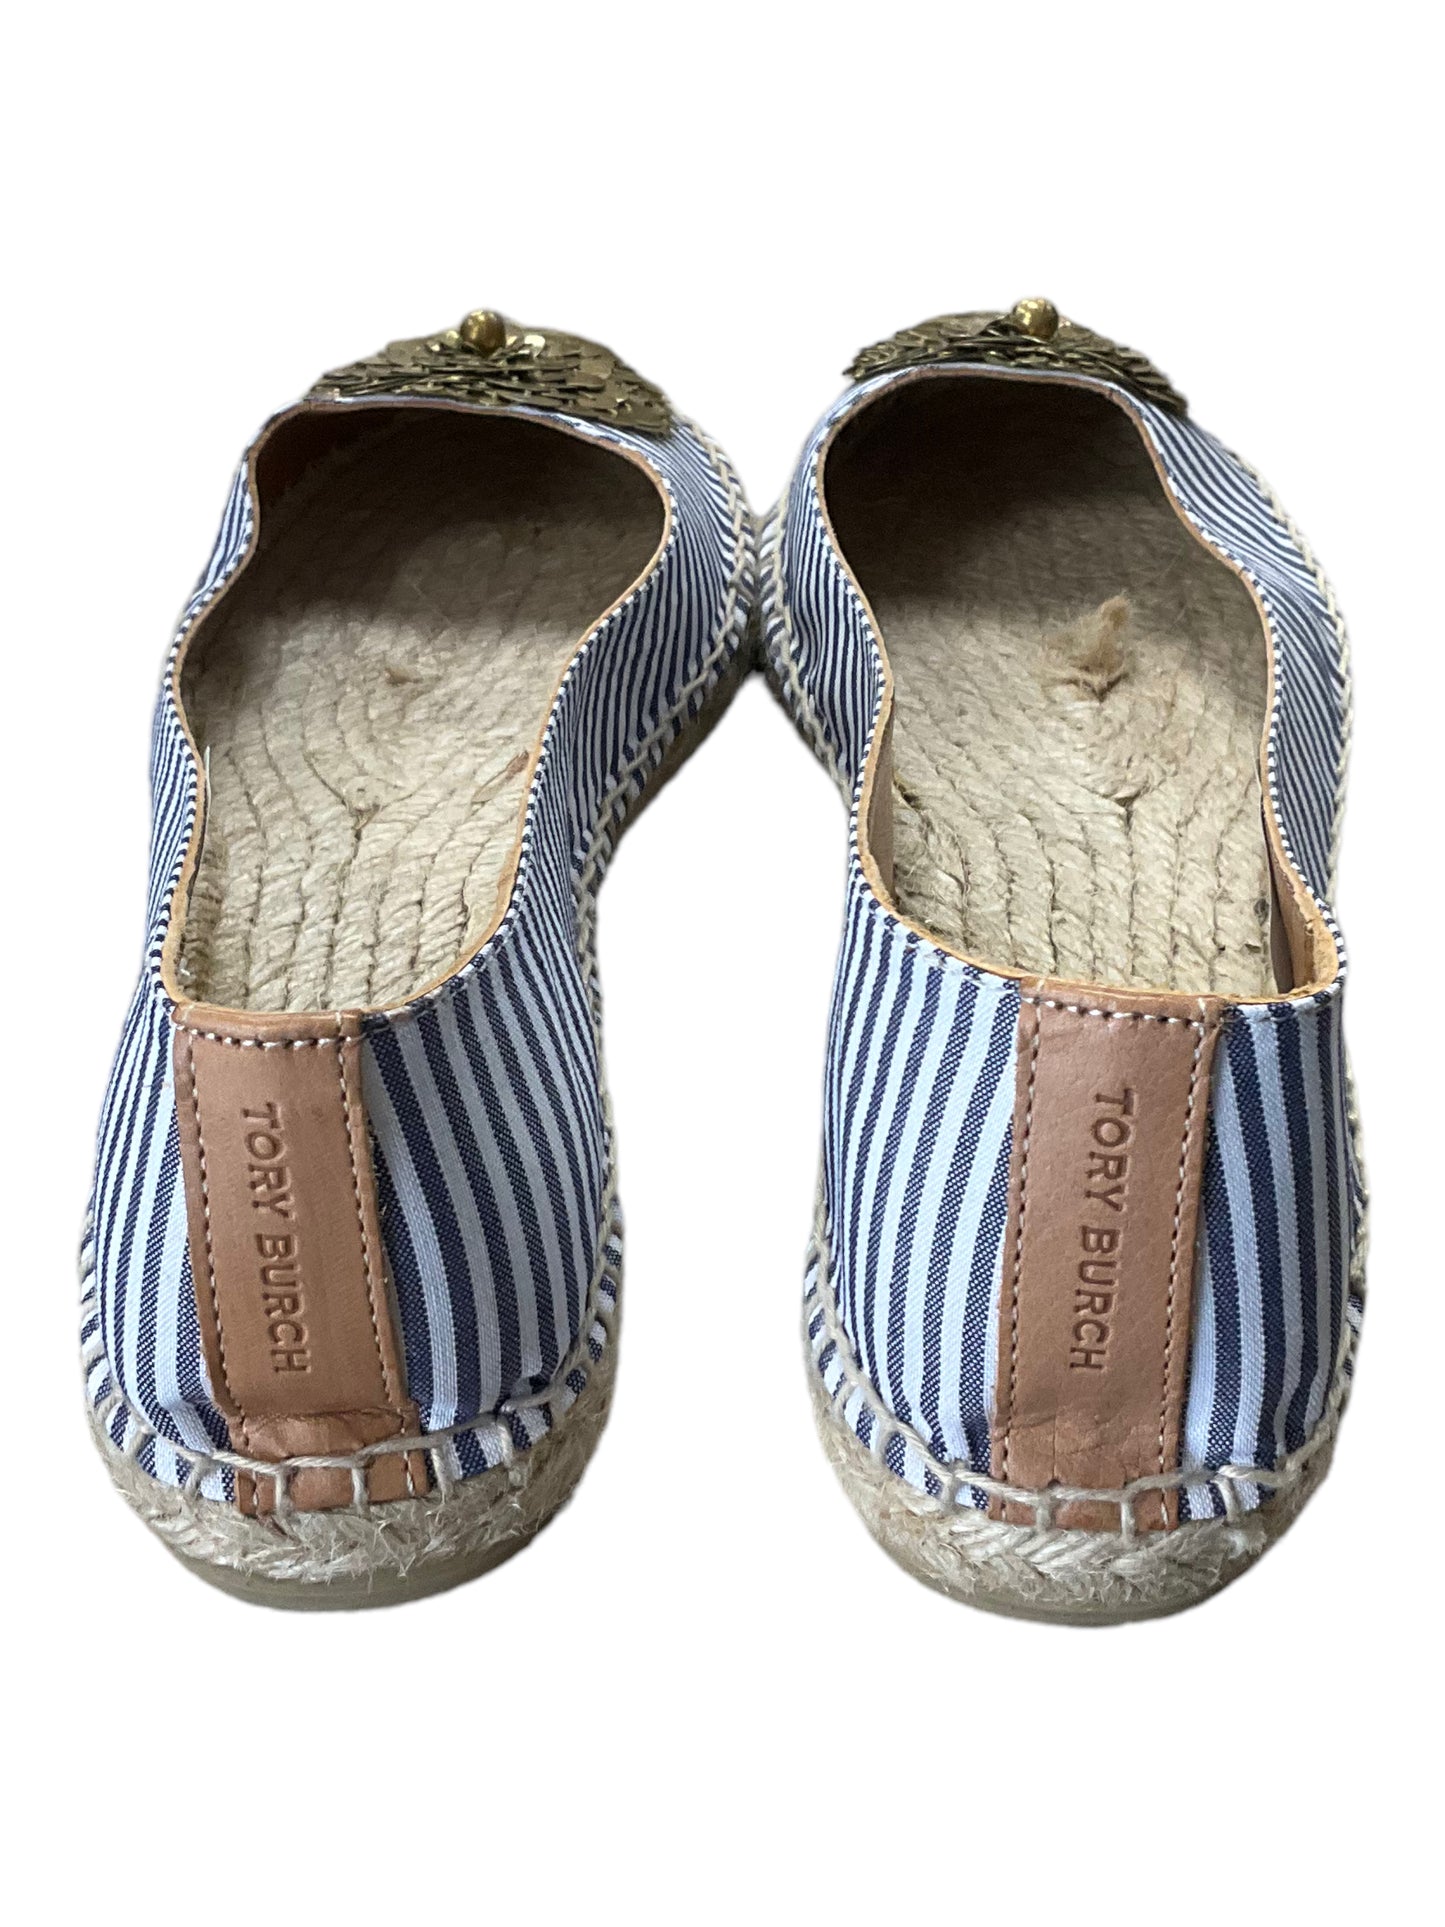 Shoes Flats Espadrille By Tory Burch  Size: 8